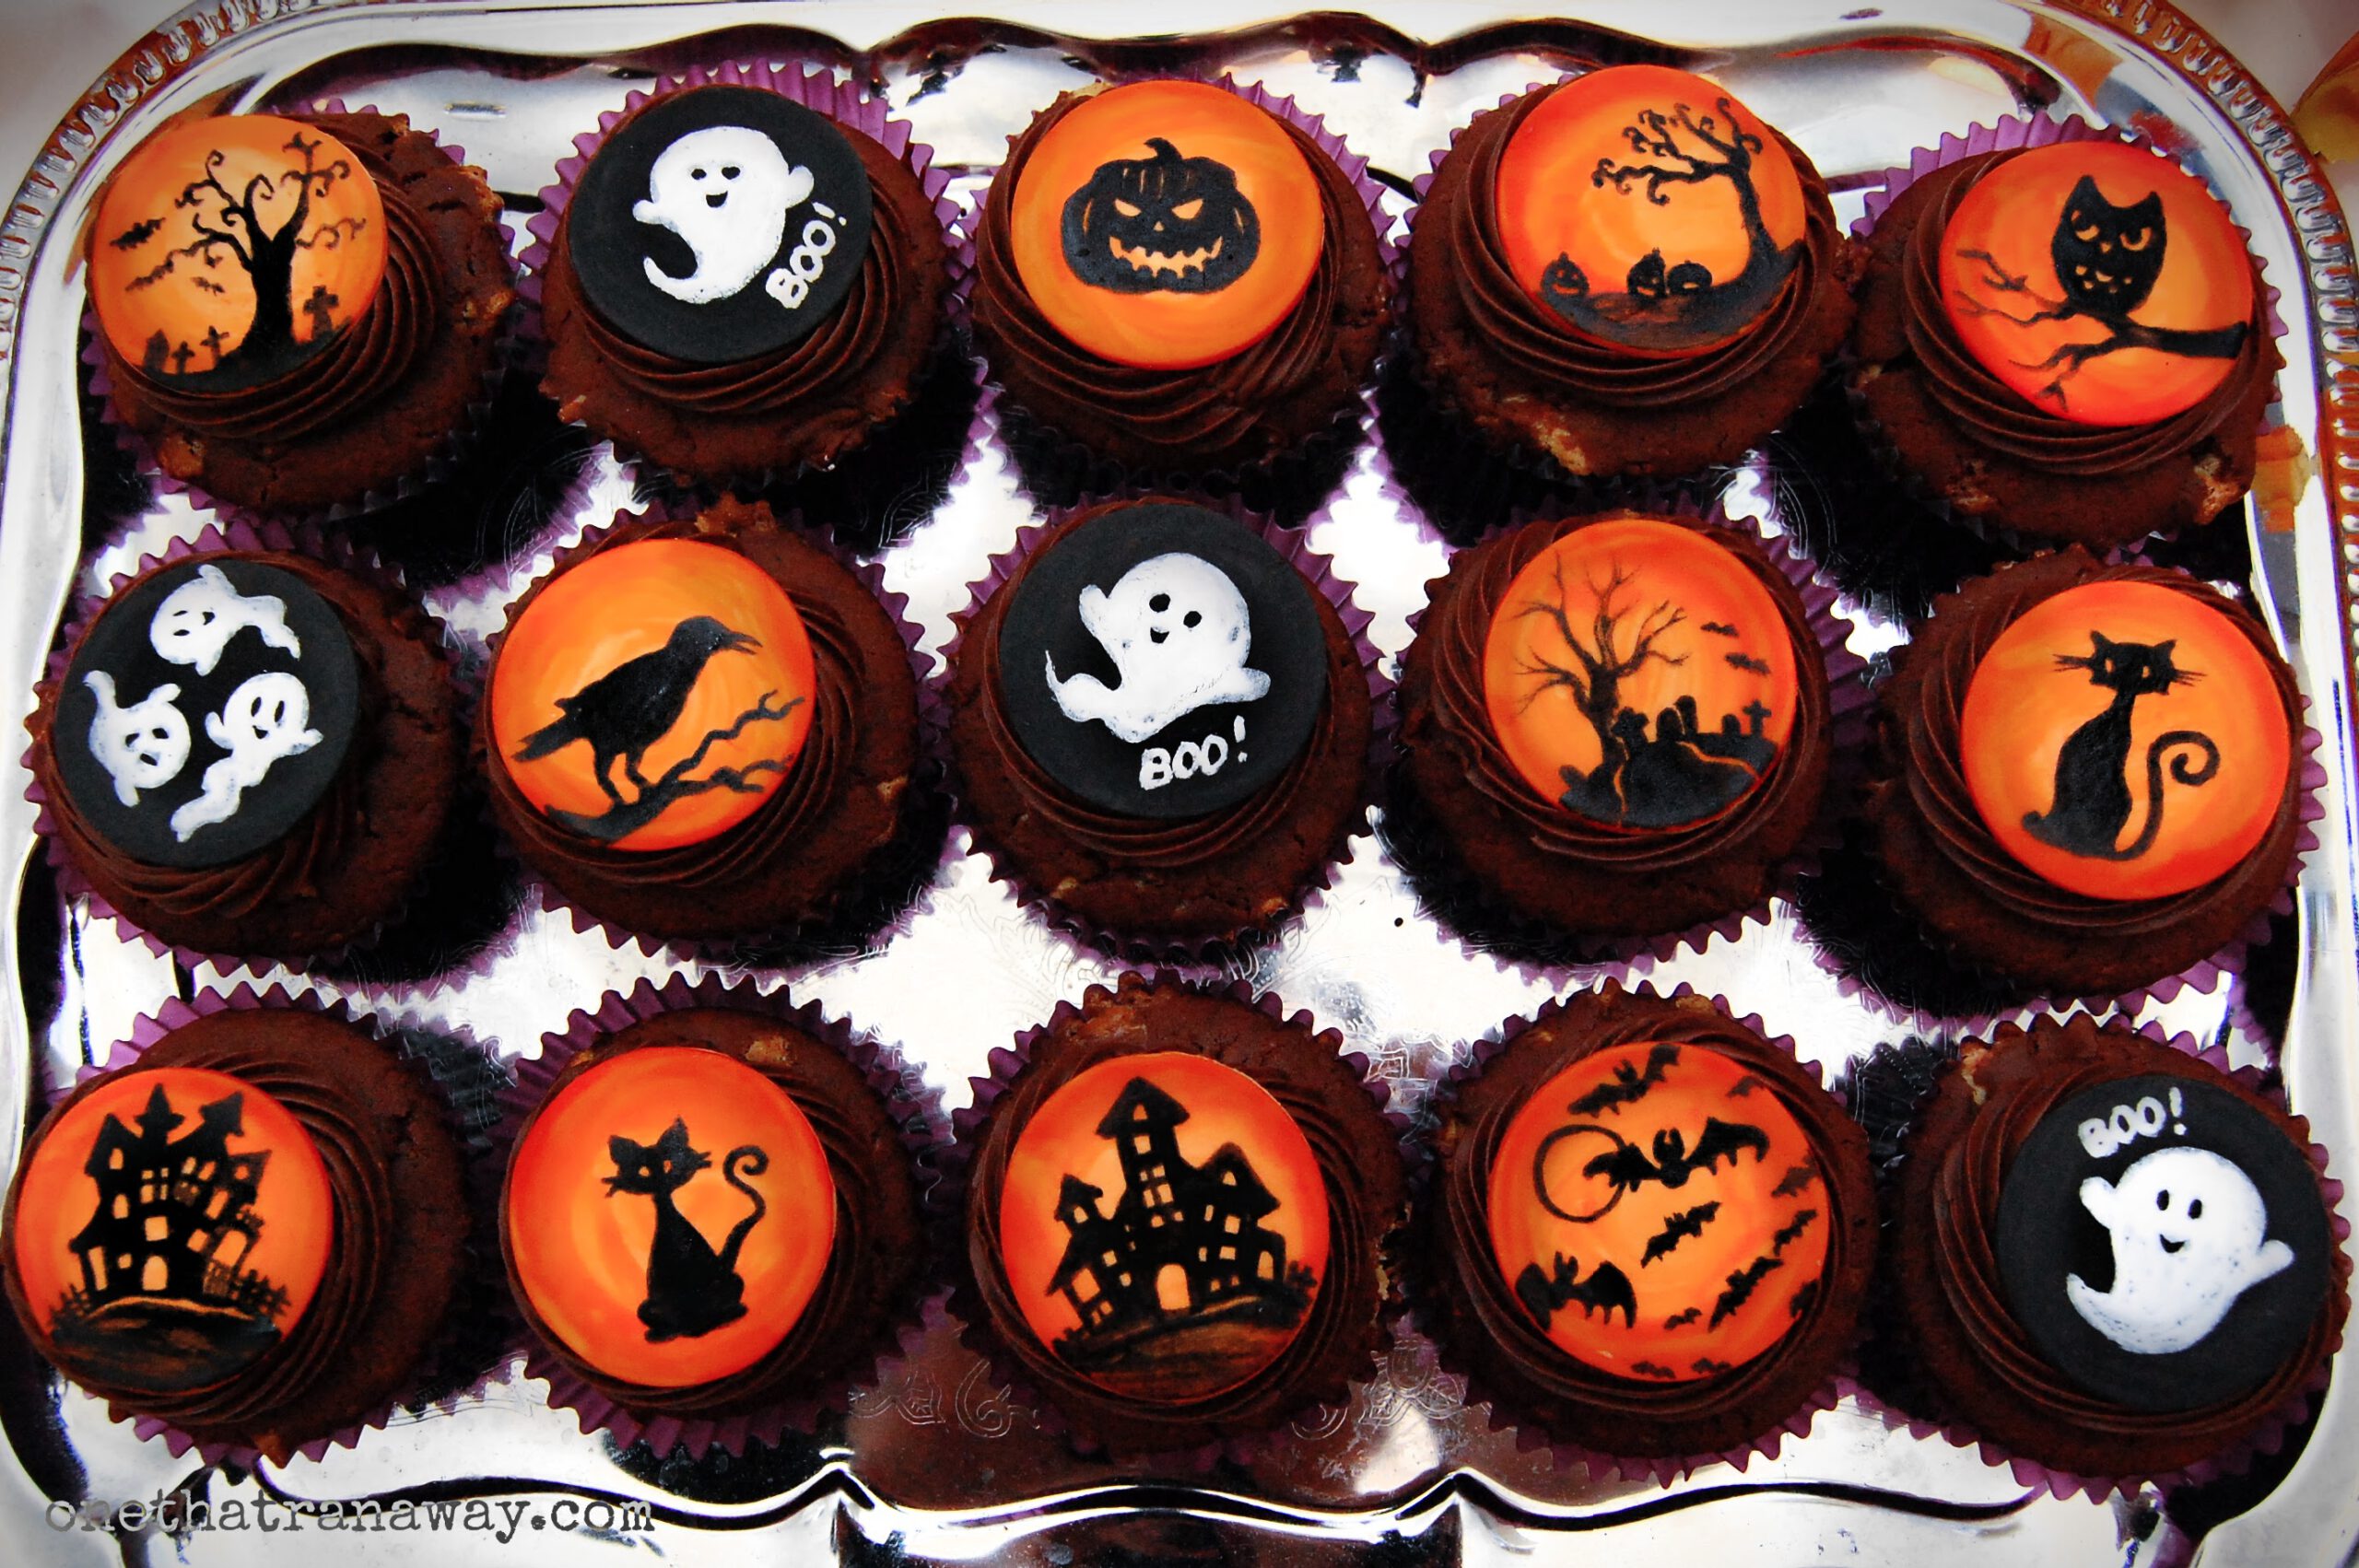 Halloween silhouette cupcake toppers on chocolate cupcakes on silver tray